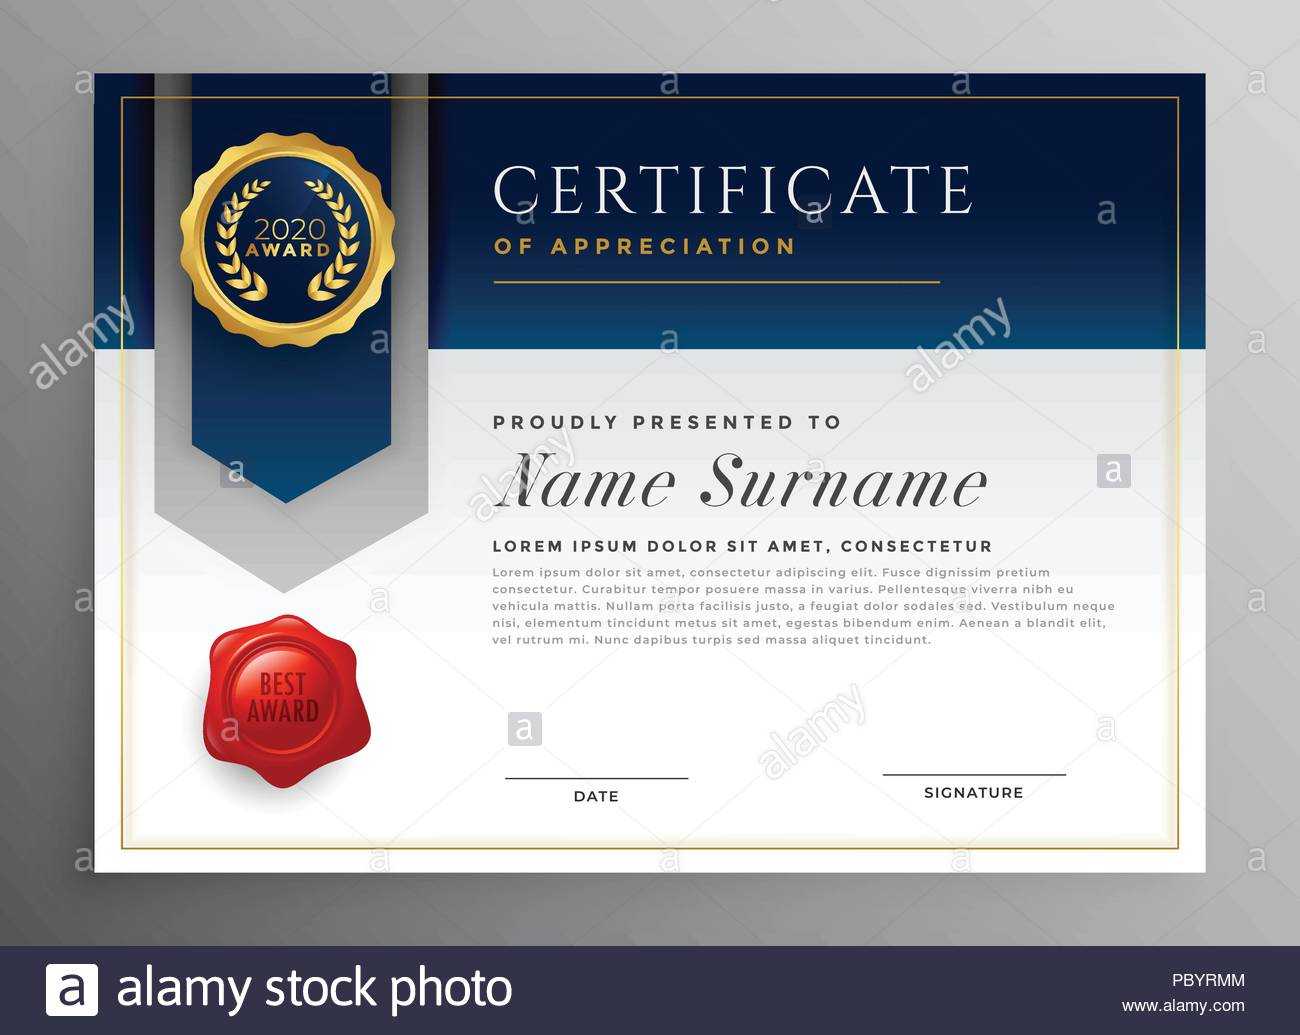 Professional Blue Certificate Template Design Stock Vector Intended For Professional Award Certificate Template